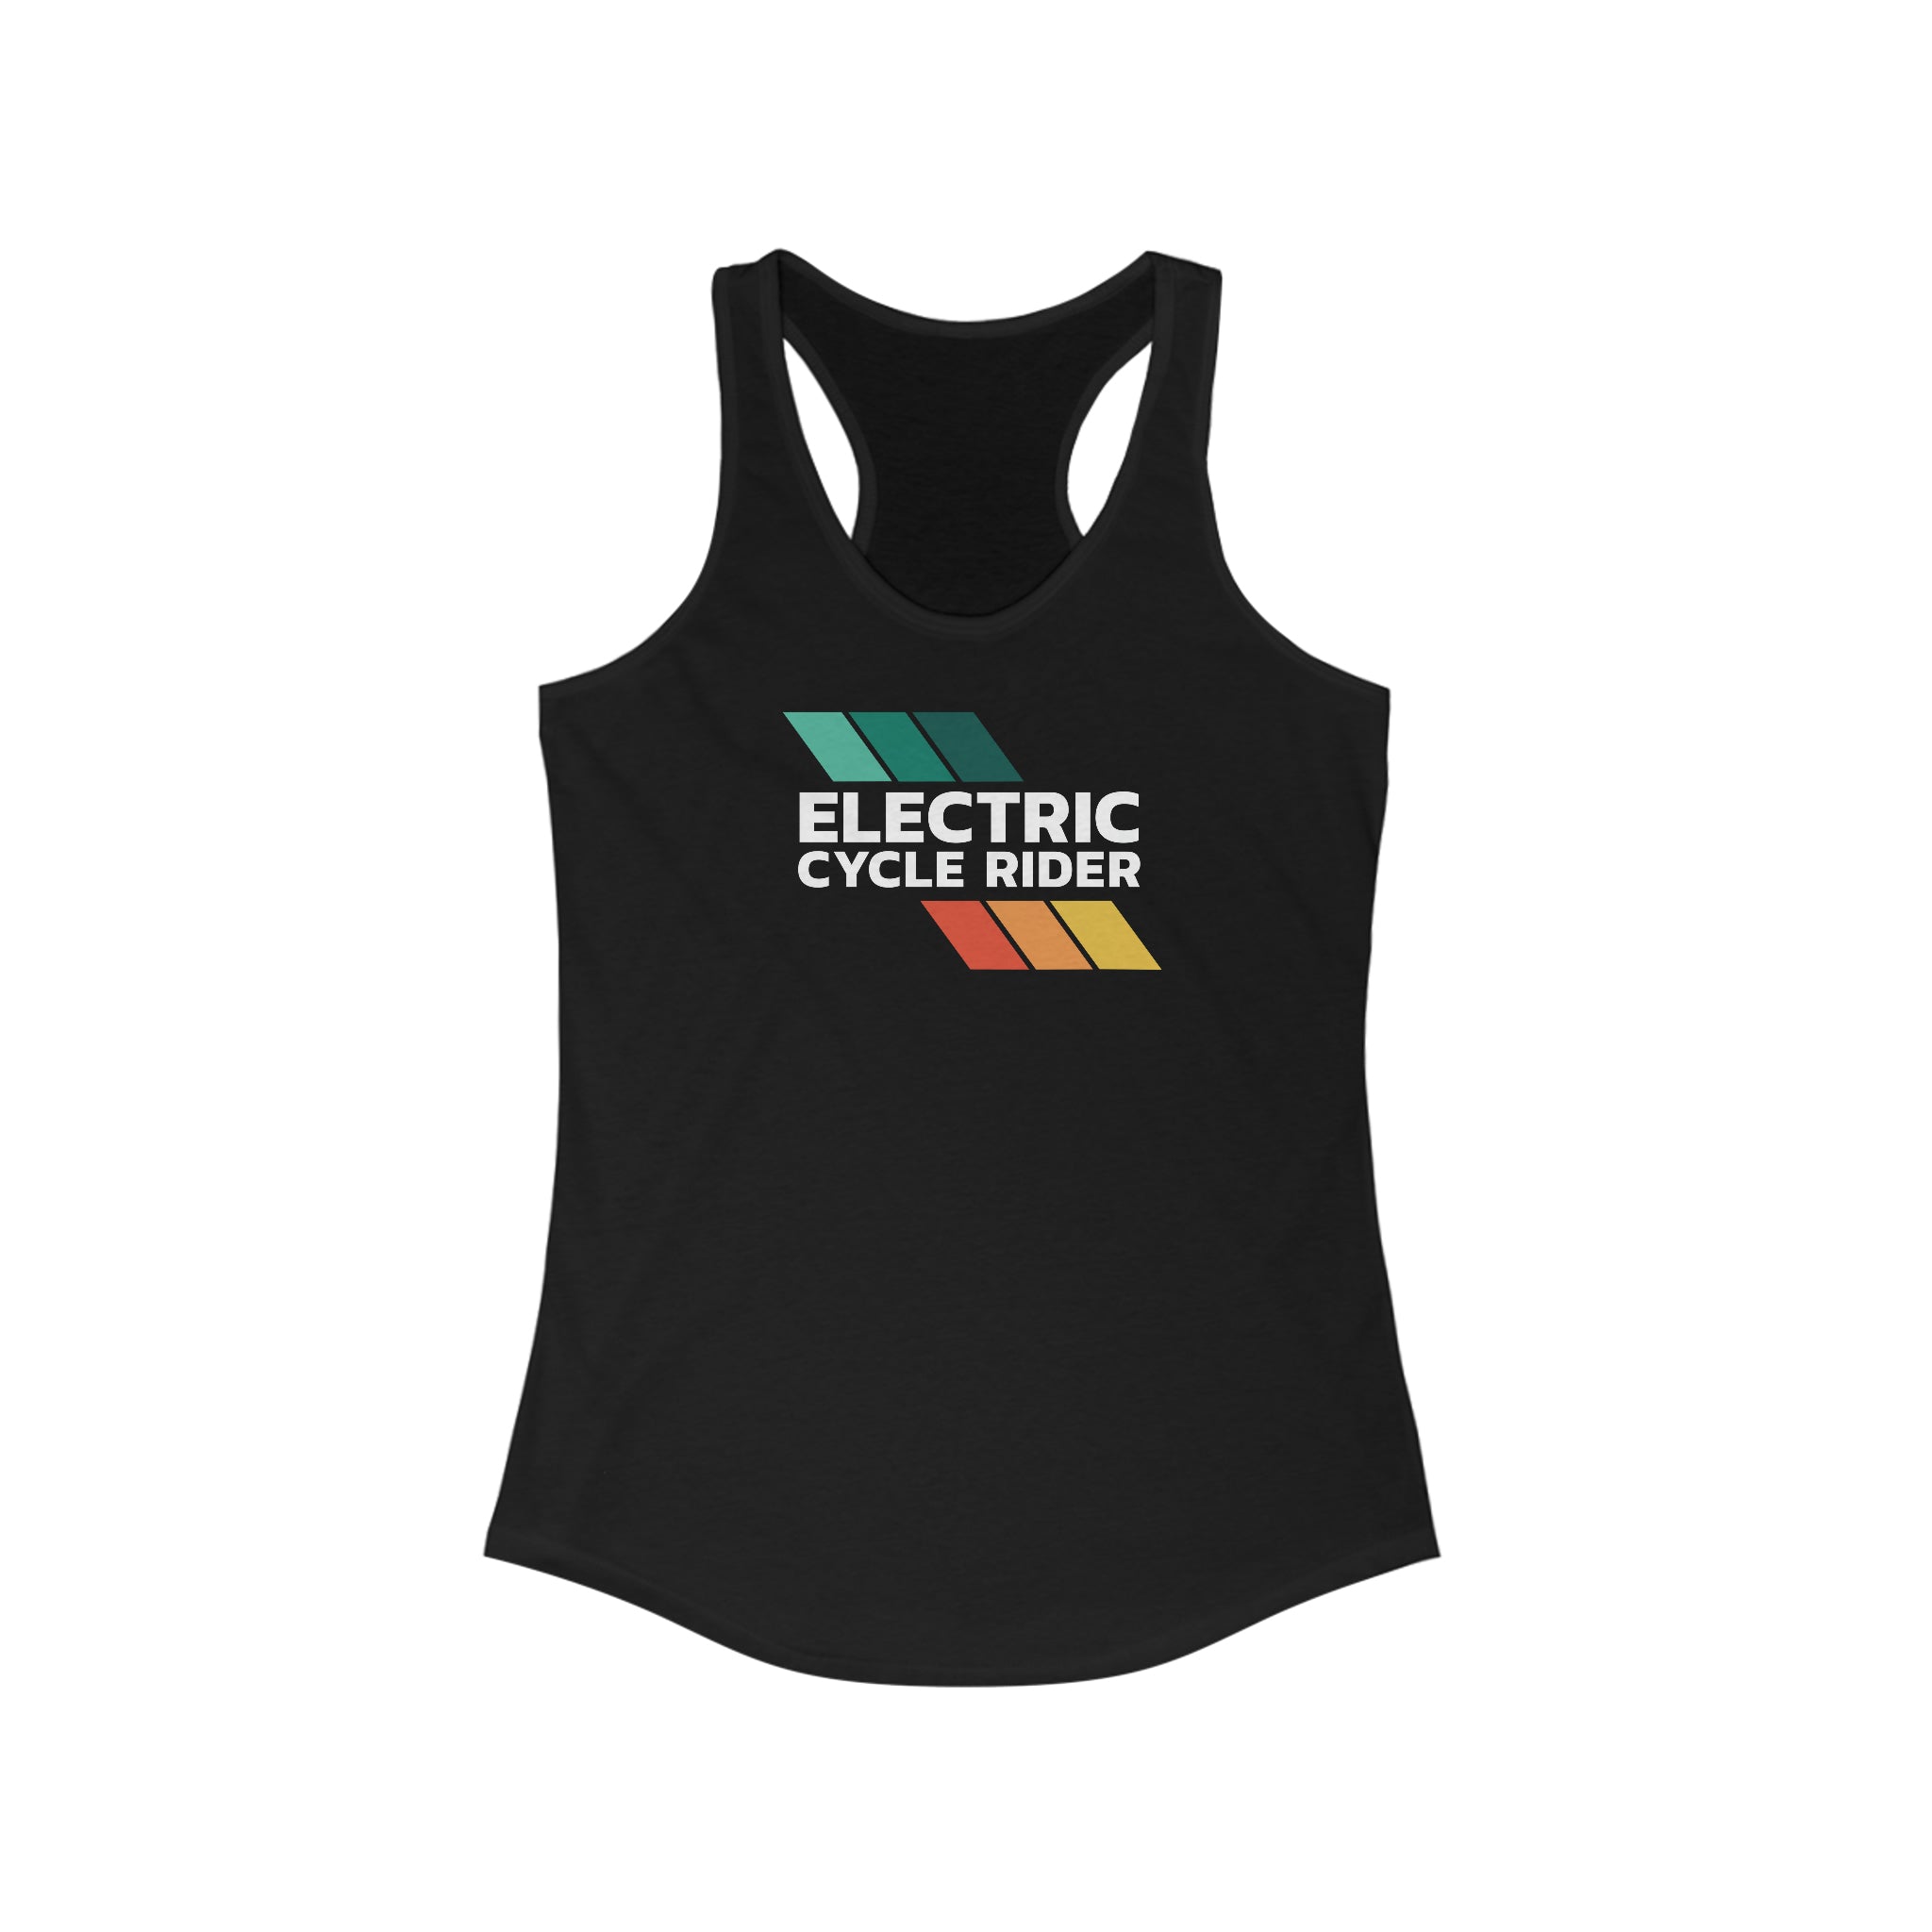 Electric Cycle Rider Tank (Women's)